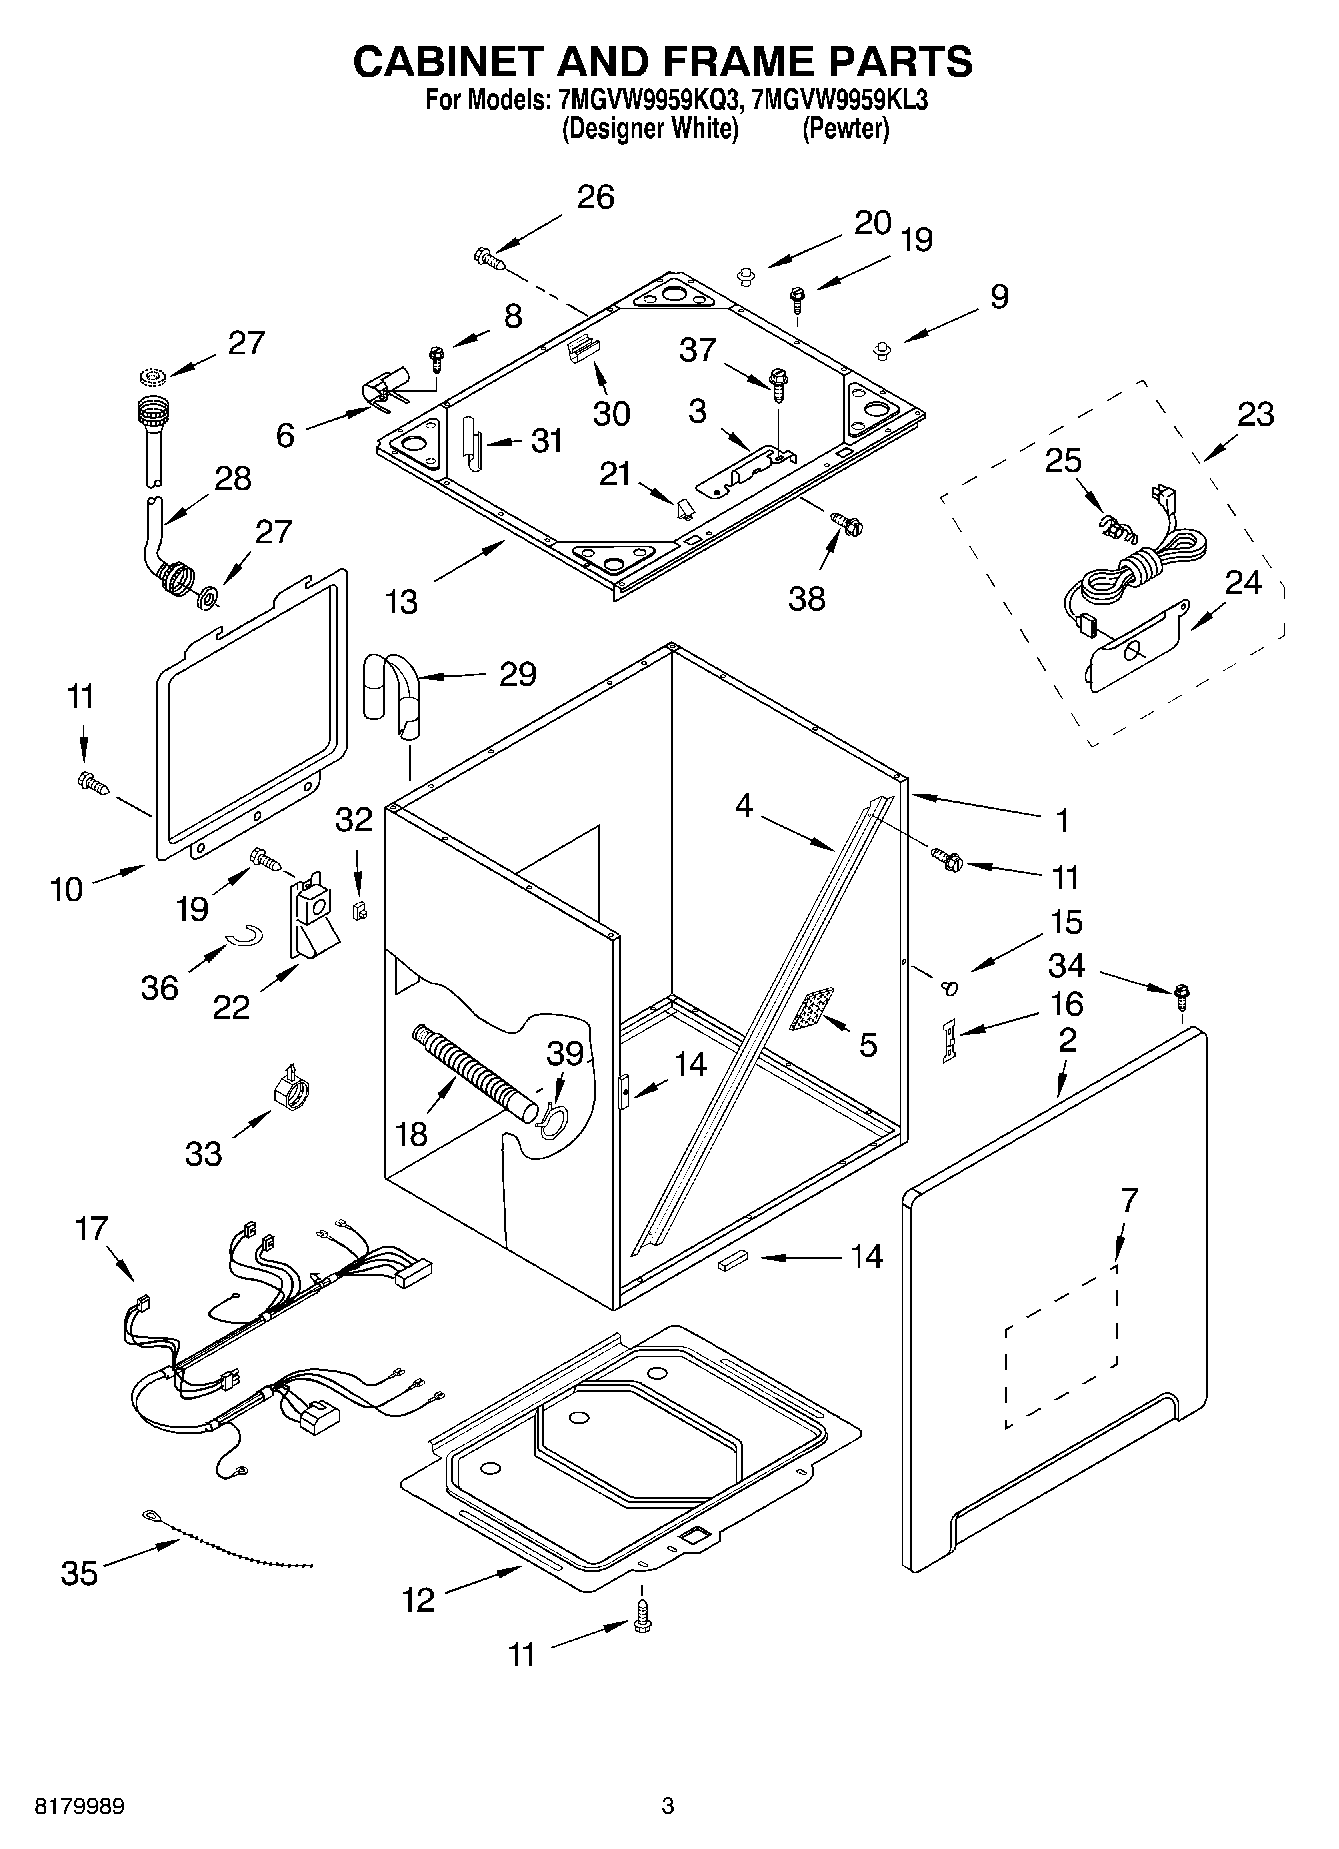 02 - CABINET AND FRAME PARTS